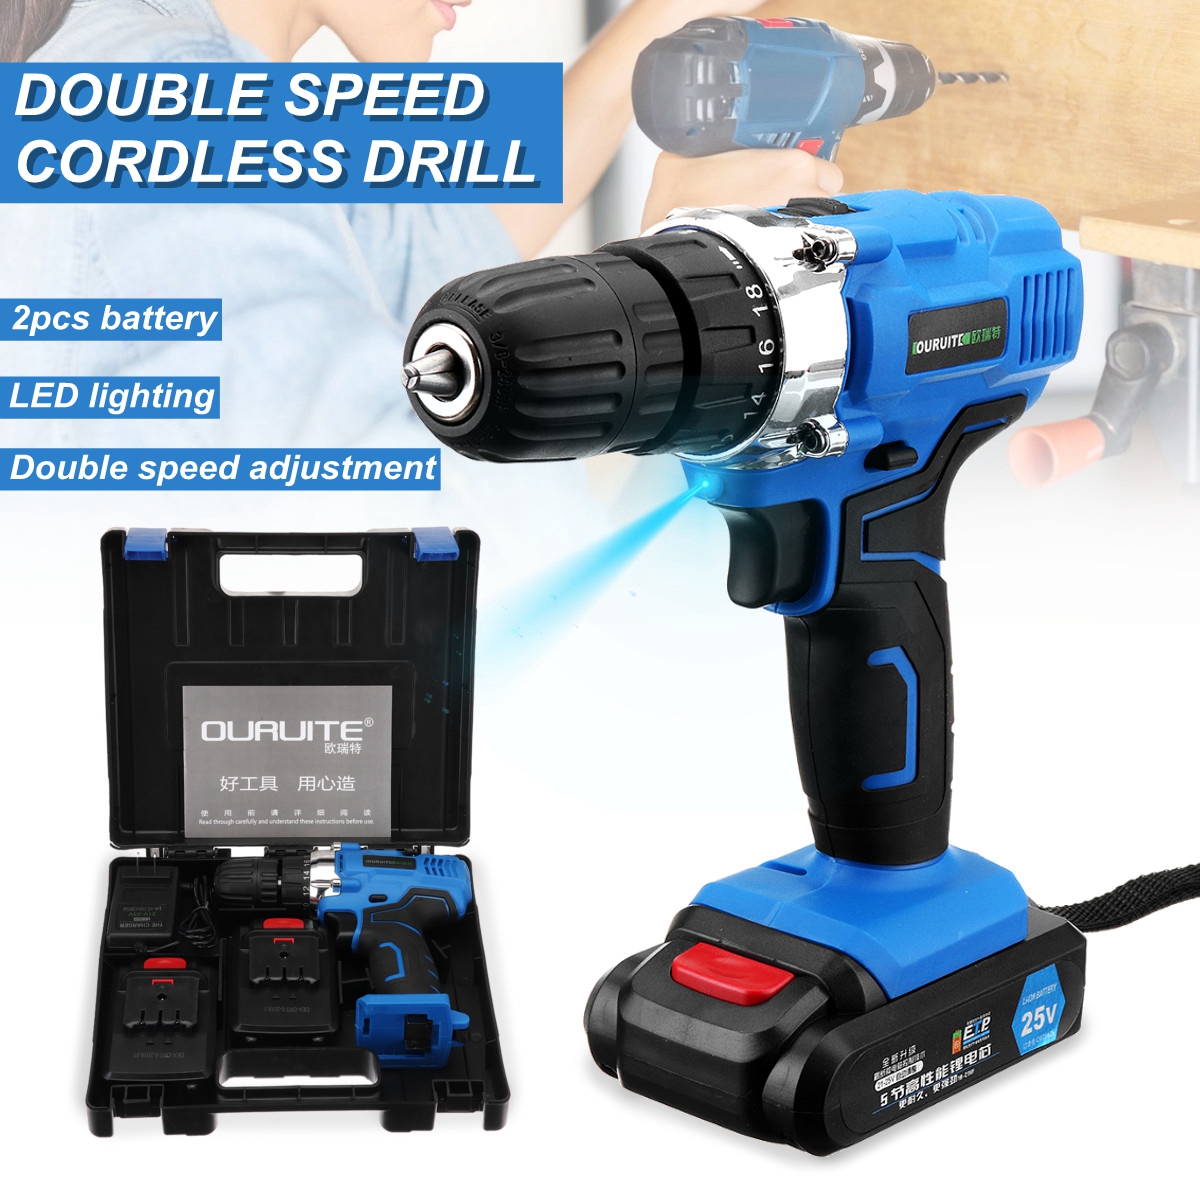 25V-Dual-Speed-Cordless-Drill-Driver-Electric-Drill-Rechargable-Power-Drills-Driver-Tool-1414380-3